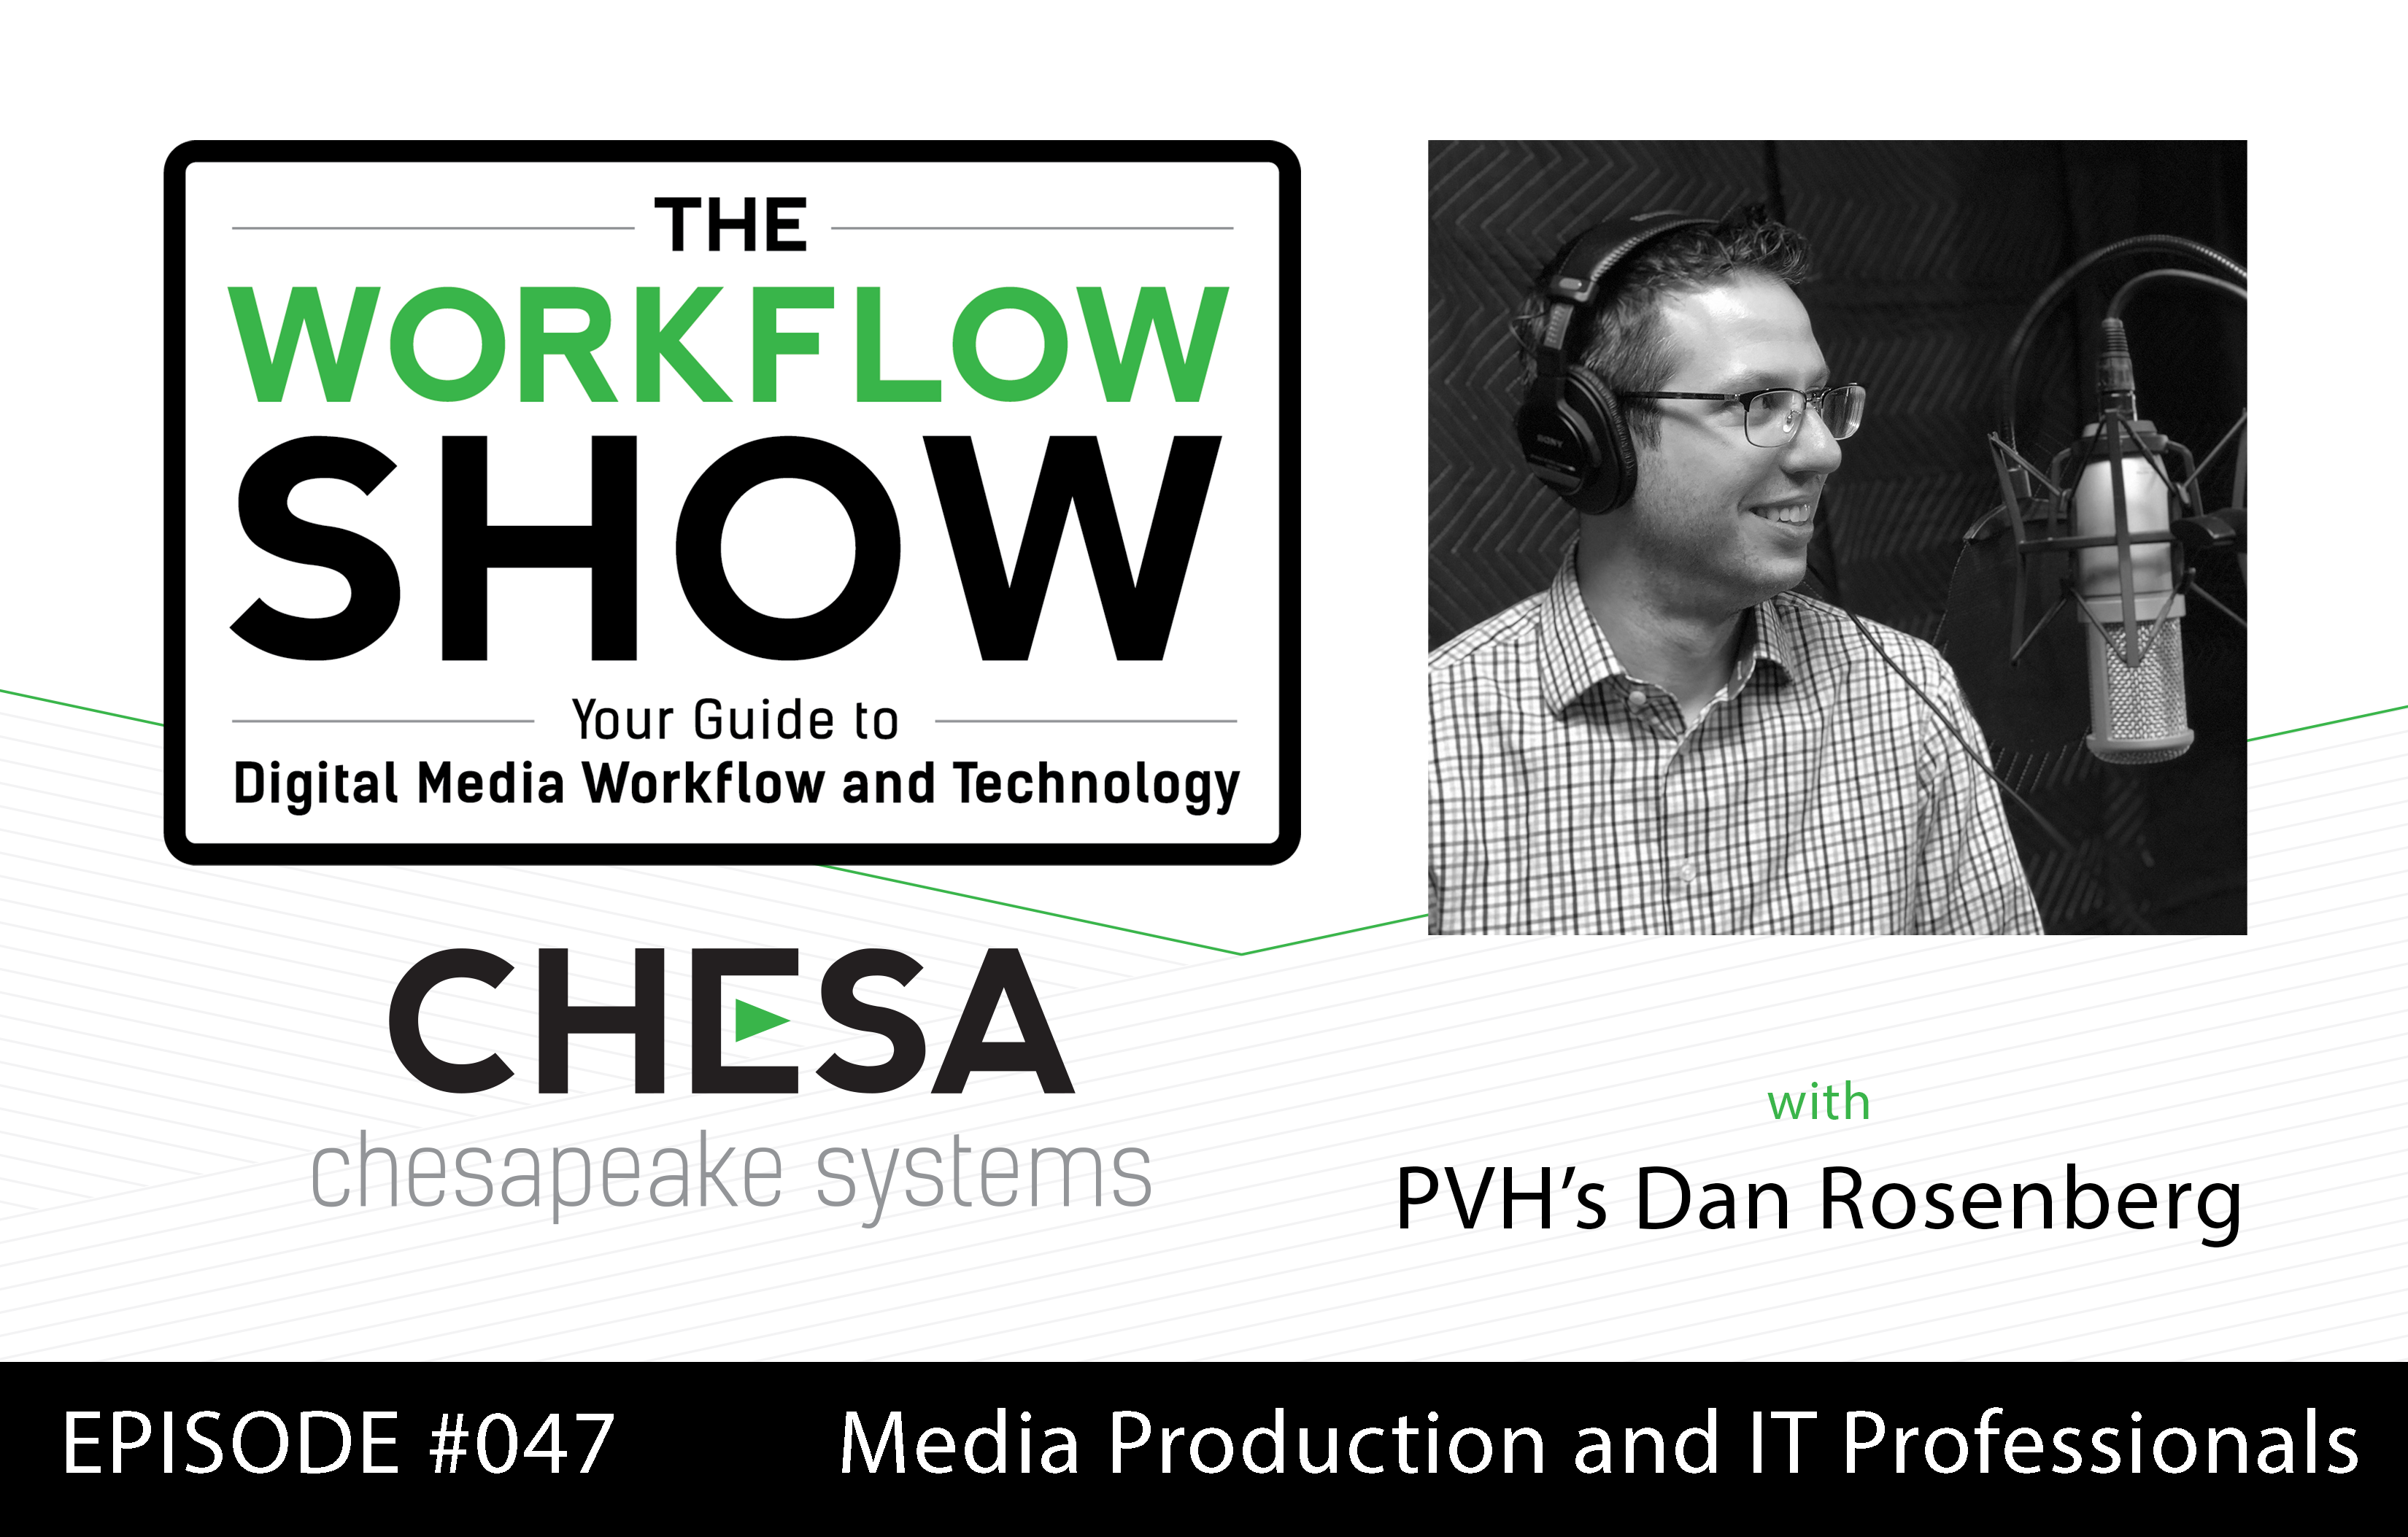 #47 "Building a Bridge between Media Production and IT Professionals with Daniel Rosenberg, Lead Creative Technologies, PVH Corp."